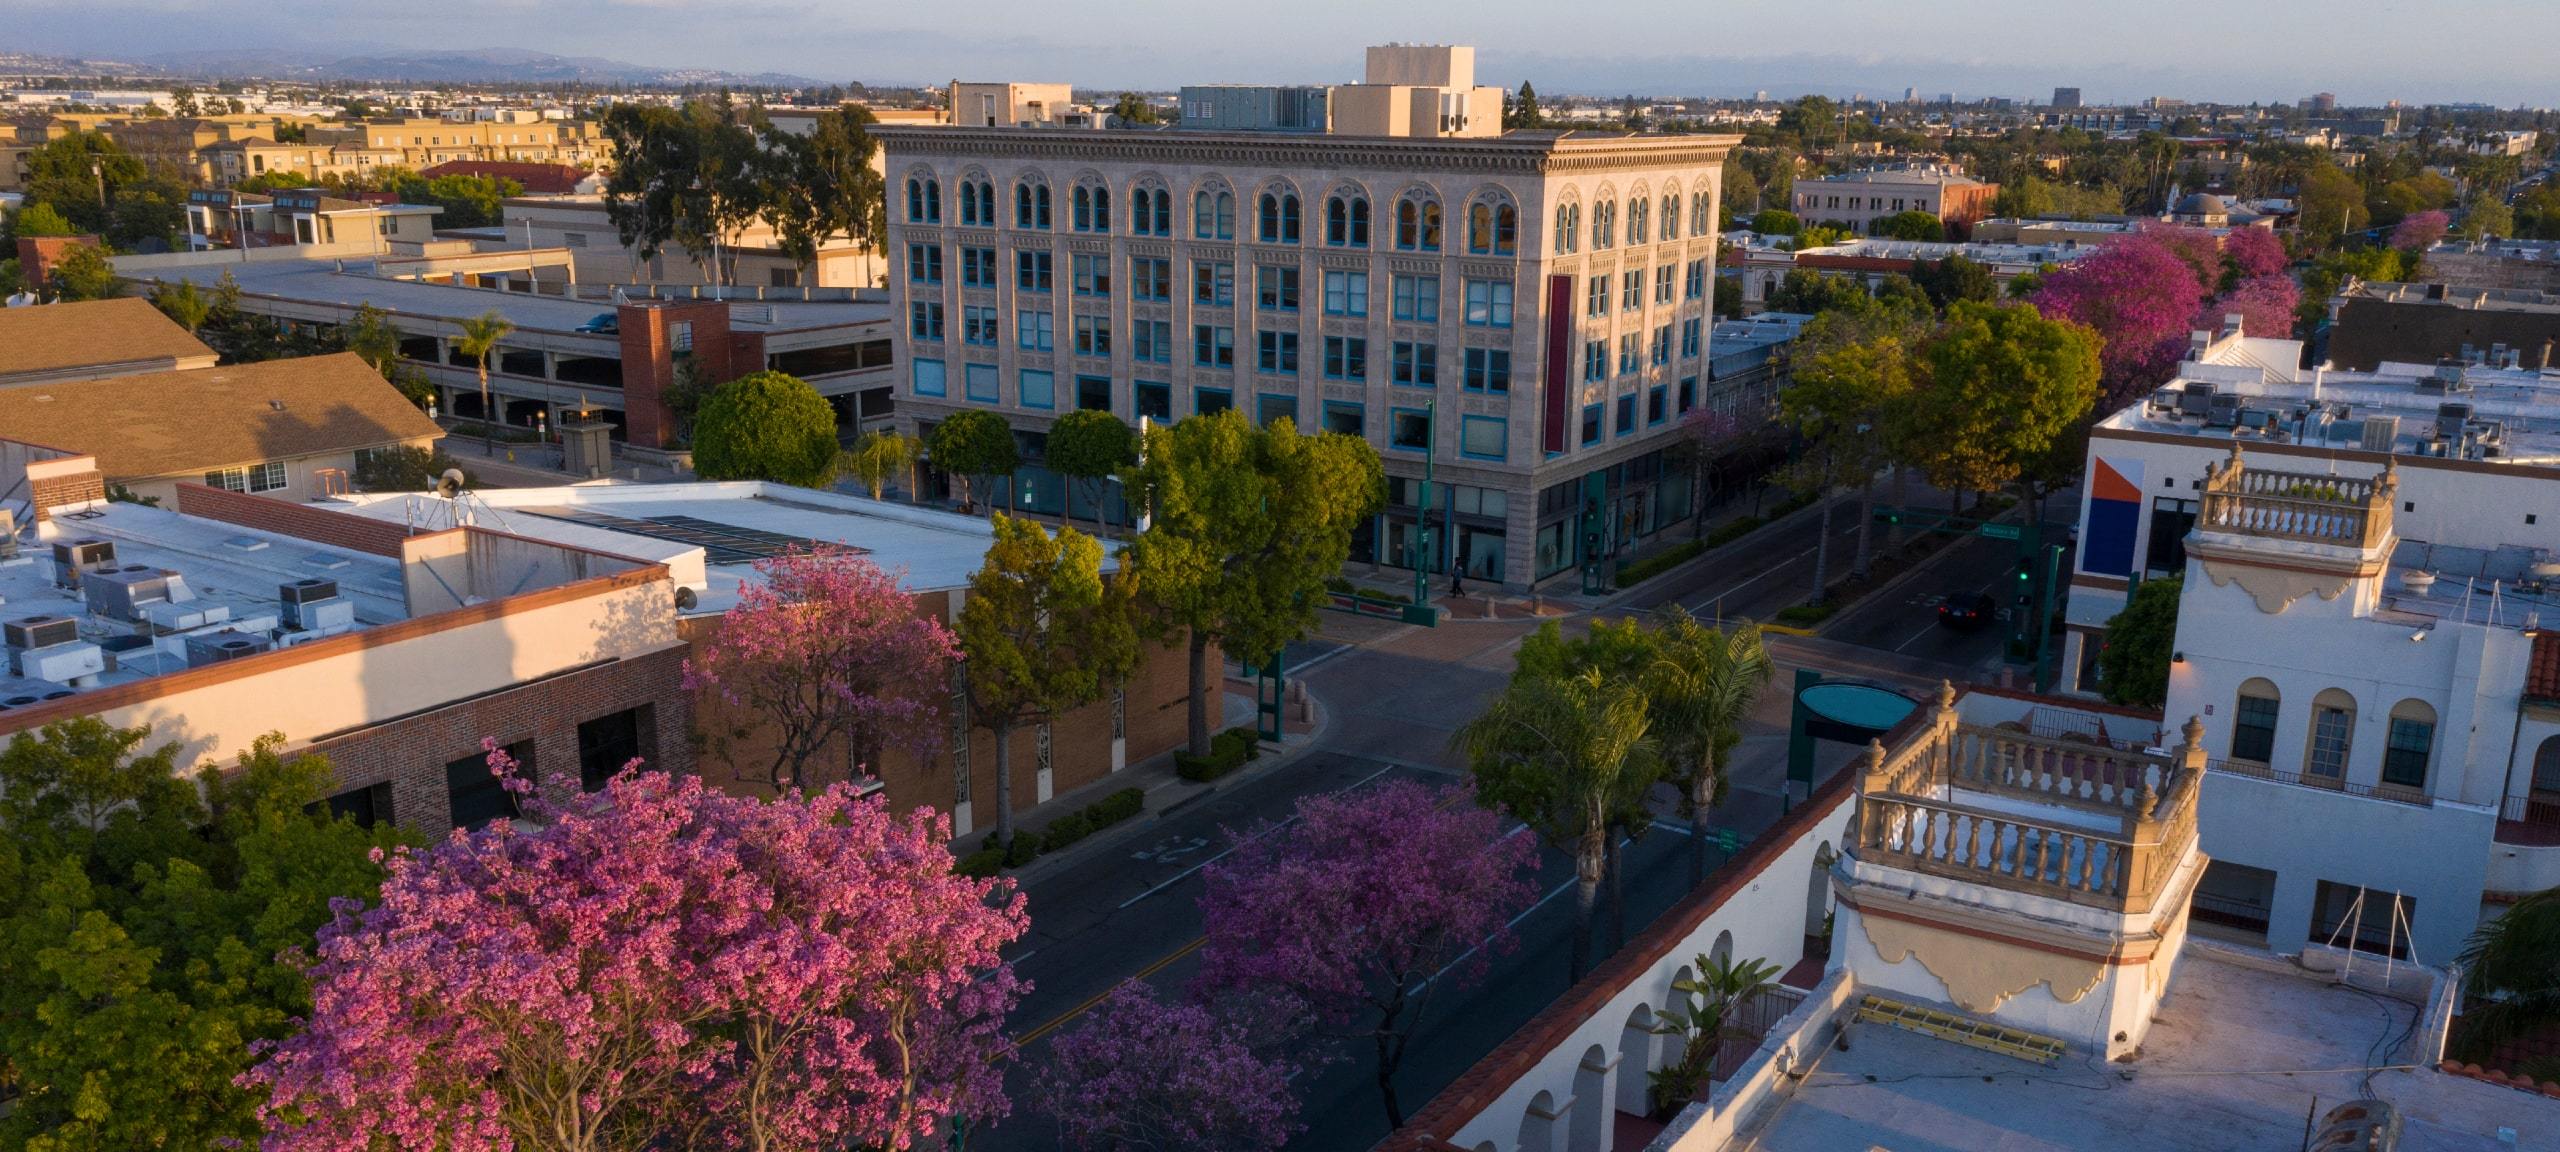 Aerial view of downtown Fullerton, CA and blooming trees